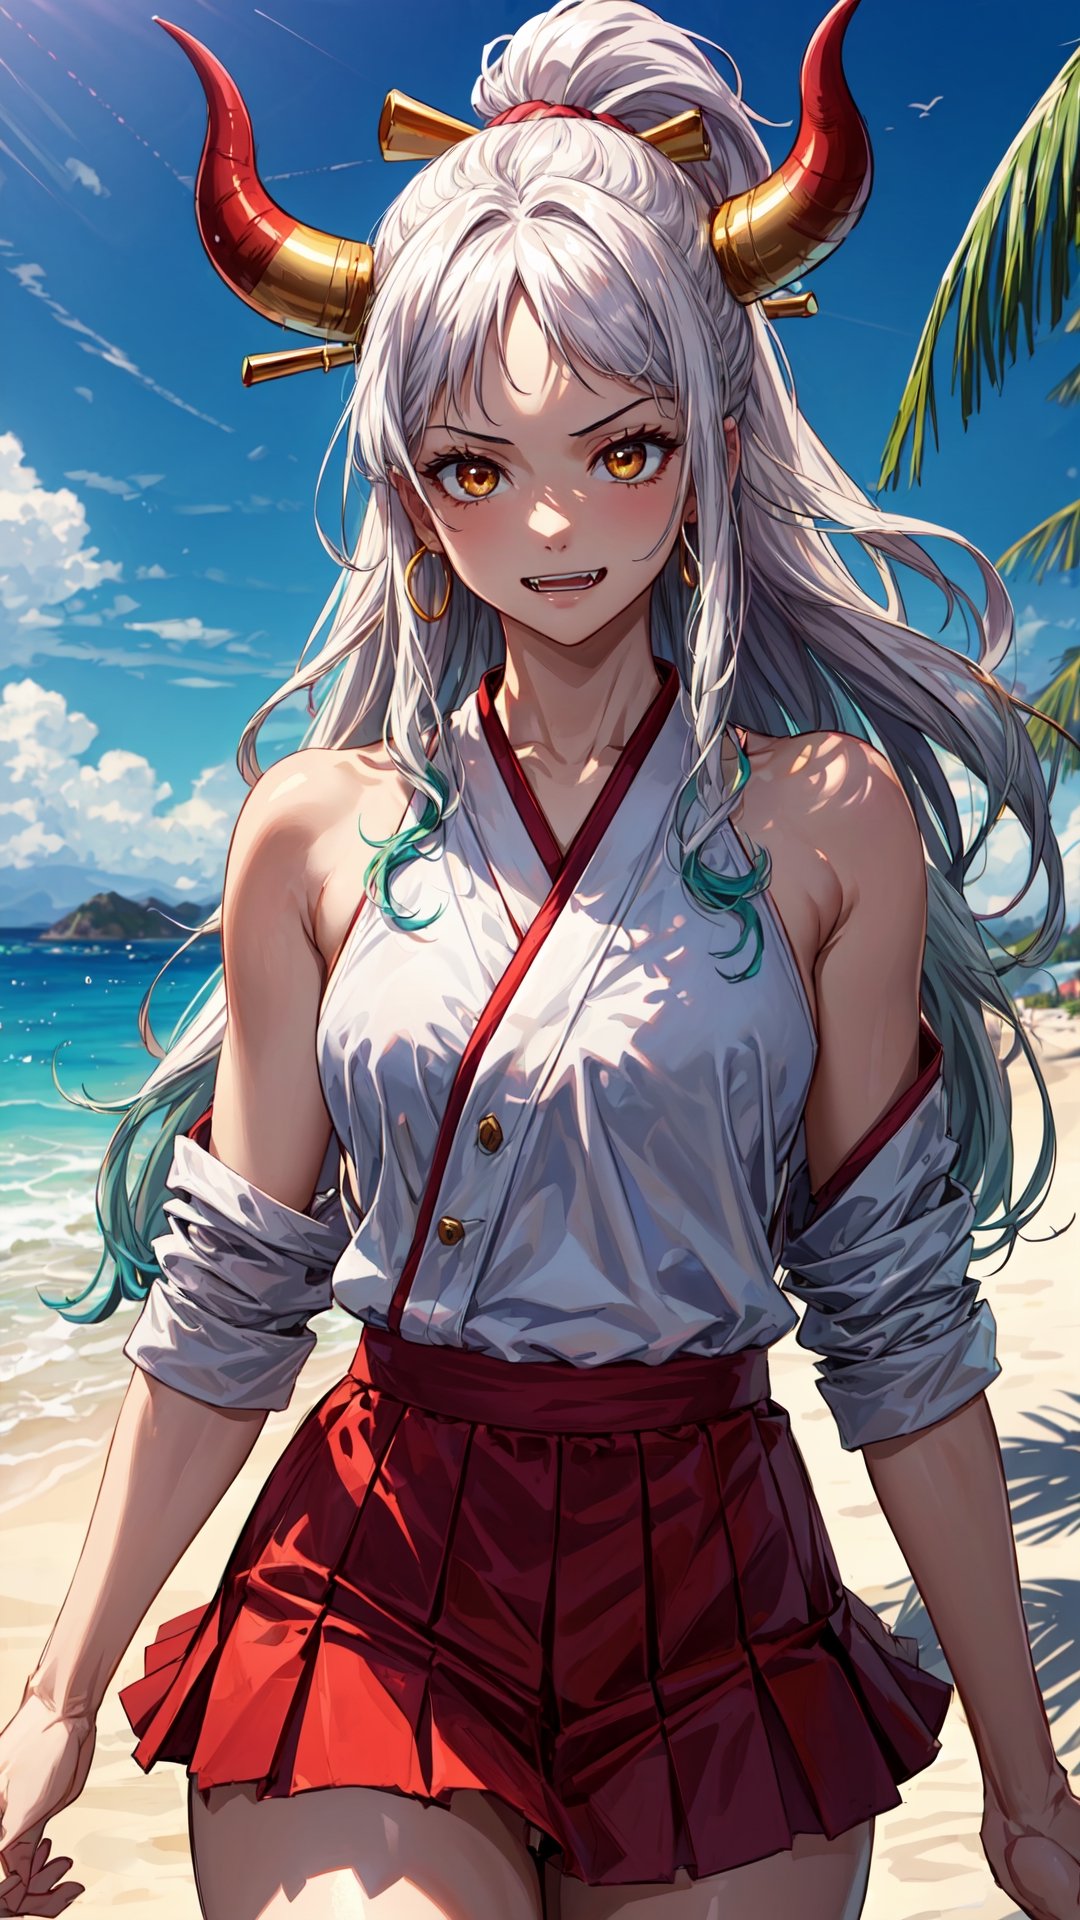 {(Yamato)}, 1girl, Sexy girl, {(anime, 8k, masterpiece, best quality, best quality, beautiful and aesthetic, professional illustration, ultra detail, perfect lighting, perfect shadow, perfect sharpness, HDR)}, {( White hair with green tips, long hair, red horns on the head, beautiful hair, detailed hair, shining hair)}, {(golden eyes, very detailed eyes, beautiful eyes, shining eyes)}, {(detailed face, detailed nose, detailed mouth, beautiful face)}, {(athletic and sensual body, perfect body, perfect arms, perfect hands, perfect fangs, perfect legs, detailed body, beautiful body)}, {(wearing red clothes, jk skirts, very clothes detailed, beautiful clothes) }, {(standing, Expression of happiness)}, {(paradise beach view, very detailed view, very beautiful view, high quality view)}, {(summer day, sunny, very detailed sky , high quality sky, beautiful sky,perfect sky)}, {(yamato\(one piece\))}